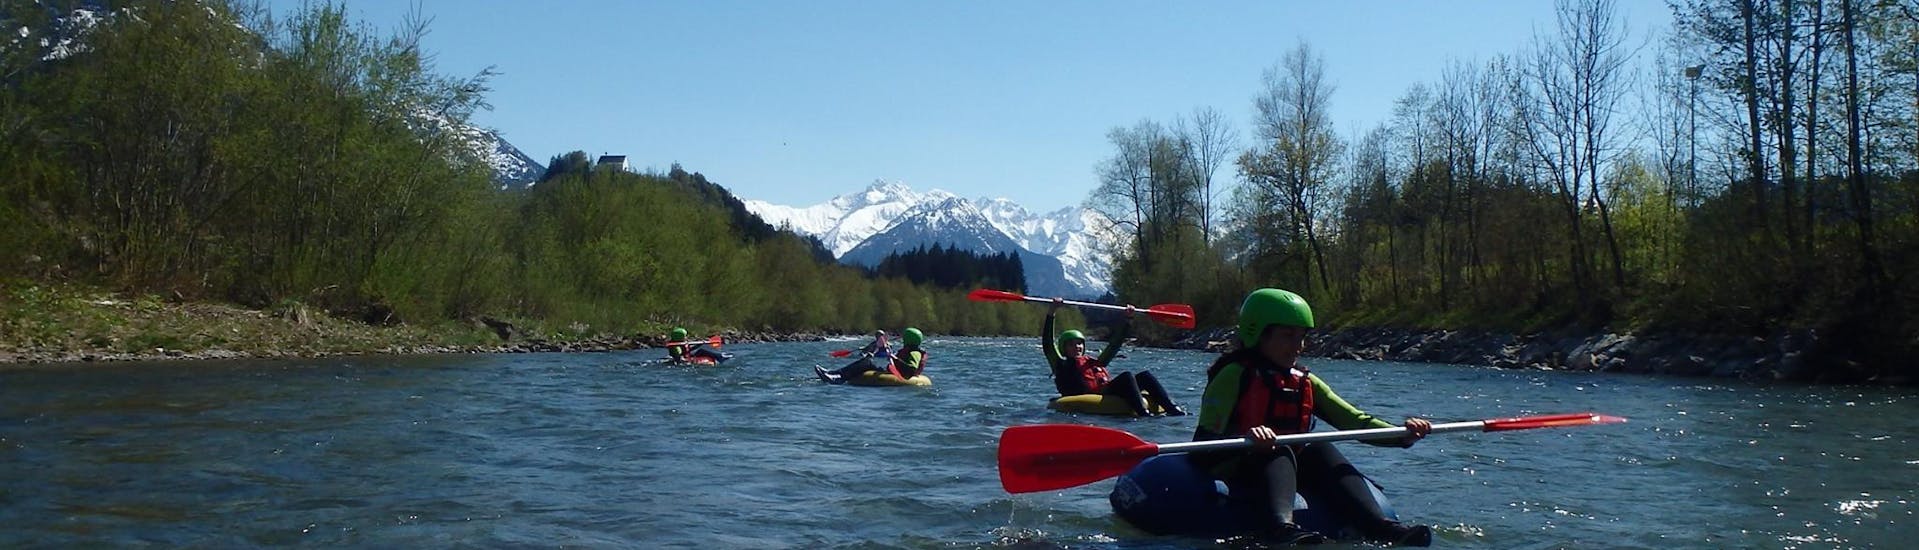 A couple of people on tubes in the water during tubing on the Iller River in the Allgäu with Outdoorzentrum Allgäu.